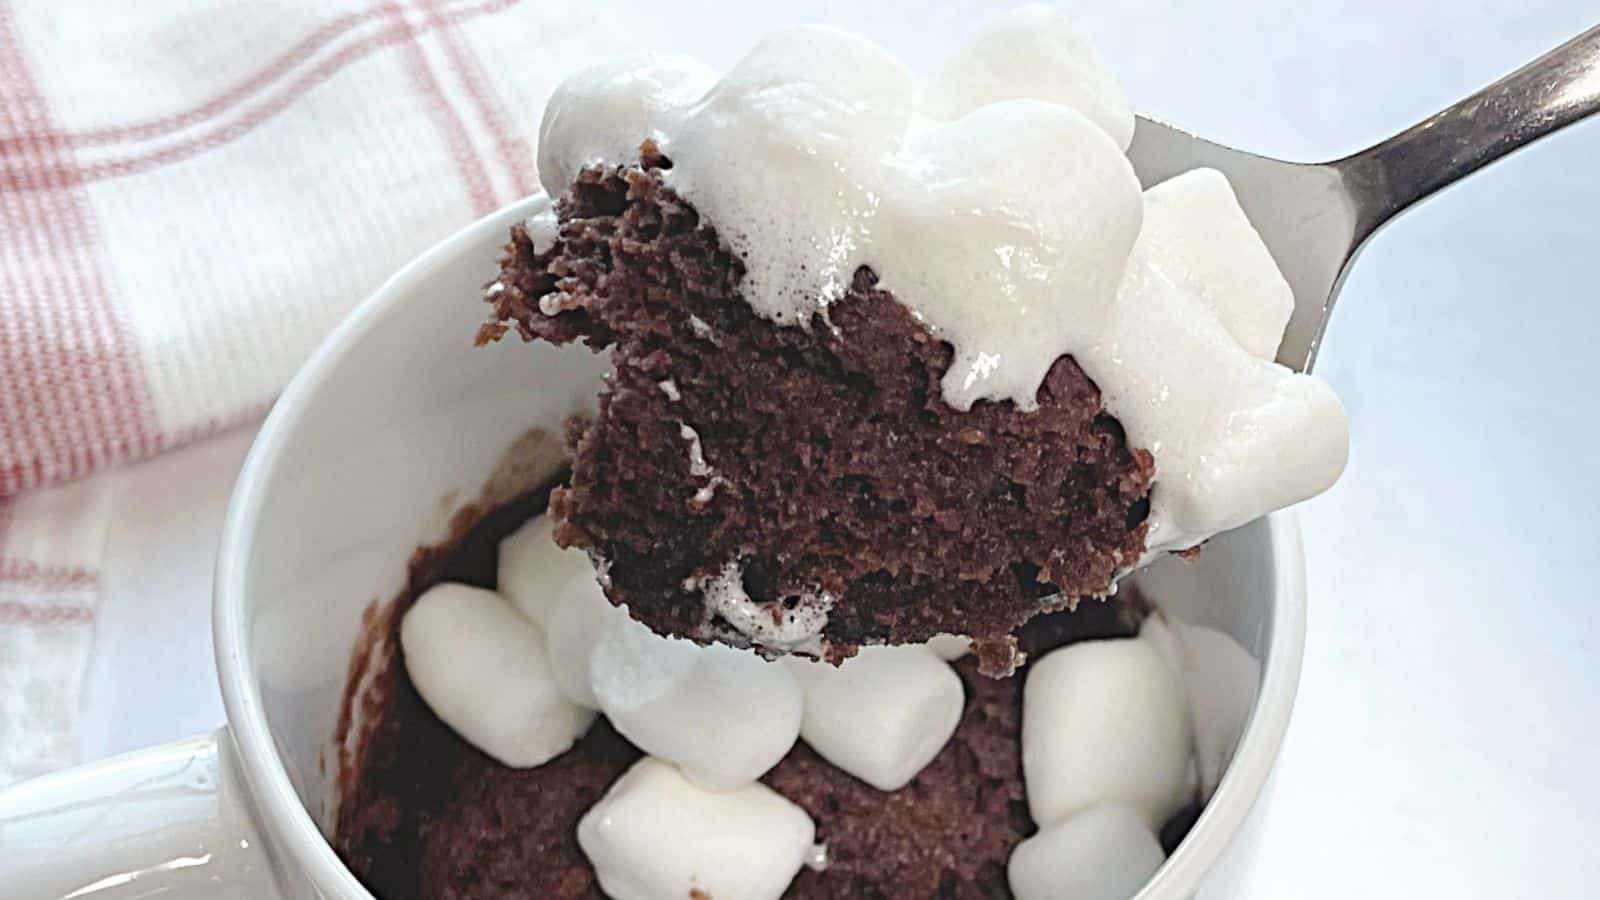 <p>Indulge in the cozy flavors of hot chocolate with this mug cake recipe. Quick and easy to make, it’s a convenient option for satisfying your sweet tooth. With its rich chocolate flavor and fluffy texture, it’s like enjoying a warm hug in dessert form. Perfect for when you need a comforting treat without the need for extensive baking.<br><strong>Get the Recipe: </strong><a href="https://littlebitrecipes.com/hot-chocolate-mug-cake/?utm_source=msn&utm_medium=page&utm_campaign=msn">Hot Chocolate Mug Cake</a></p>